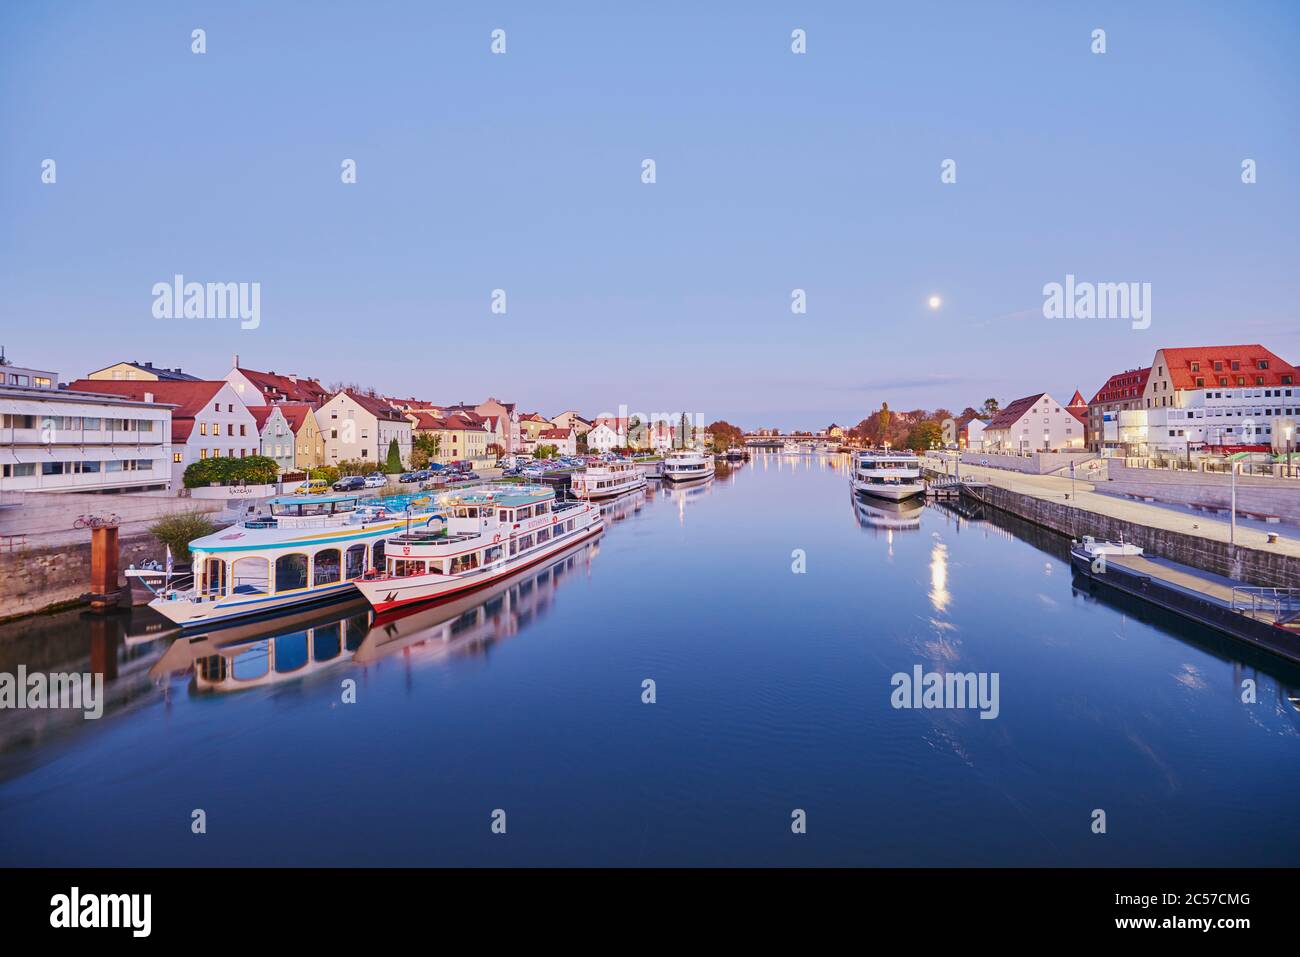 Old town, view from Jahninsel, Marc-Aurel-Ufer, autumn, Regensburg, Bayern, Germany, Europa Stock Photo